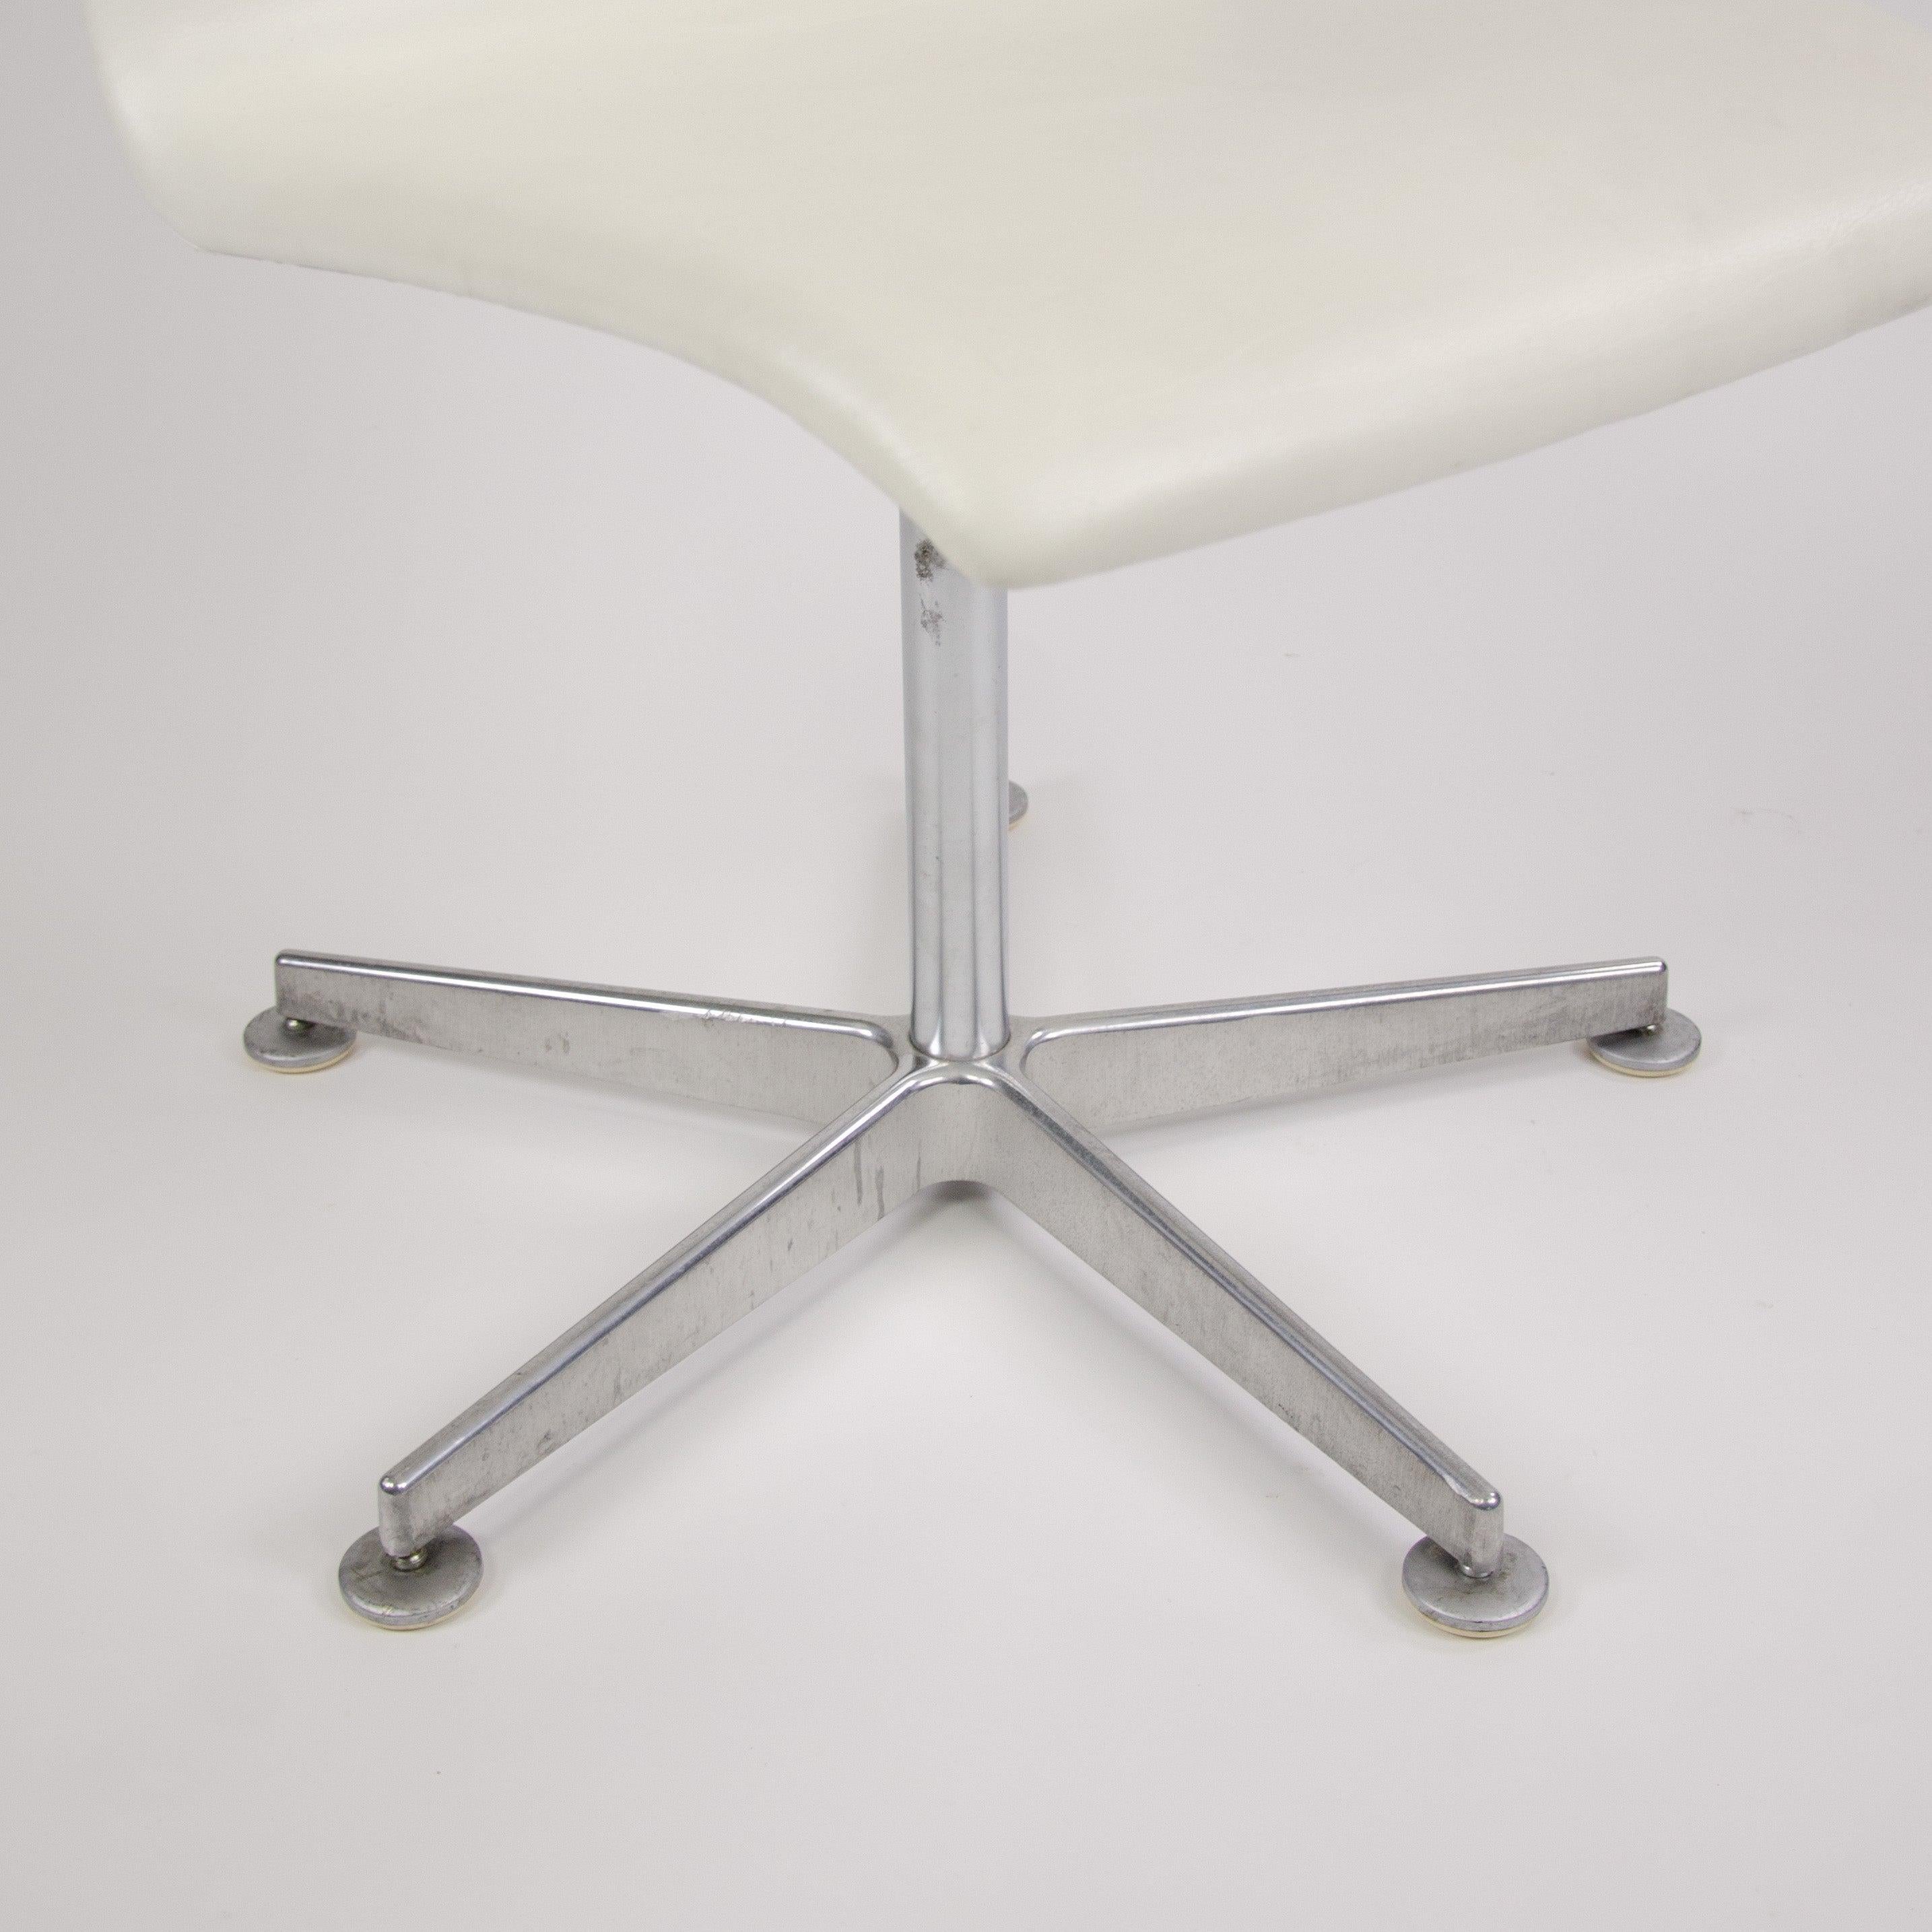 Fritz Hansen Arne Jacobsen Tall Oxford Chair White Leather 2007 4x Available For Sale 4